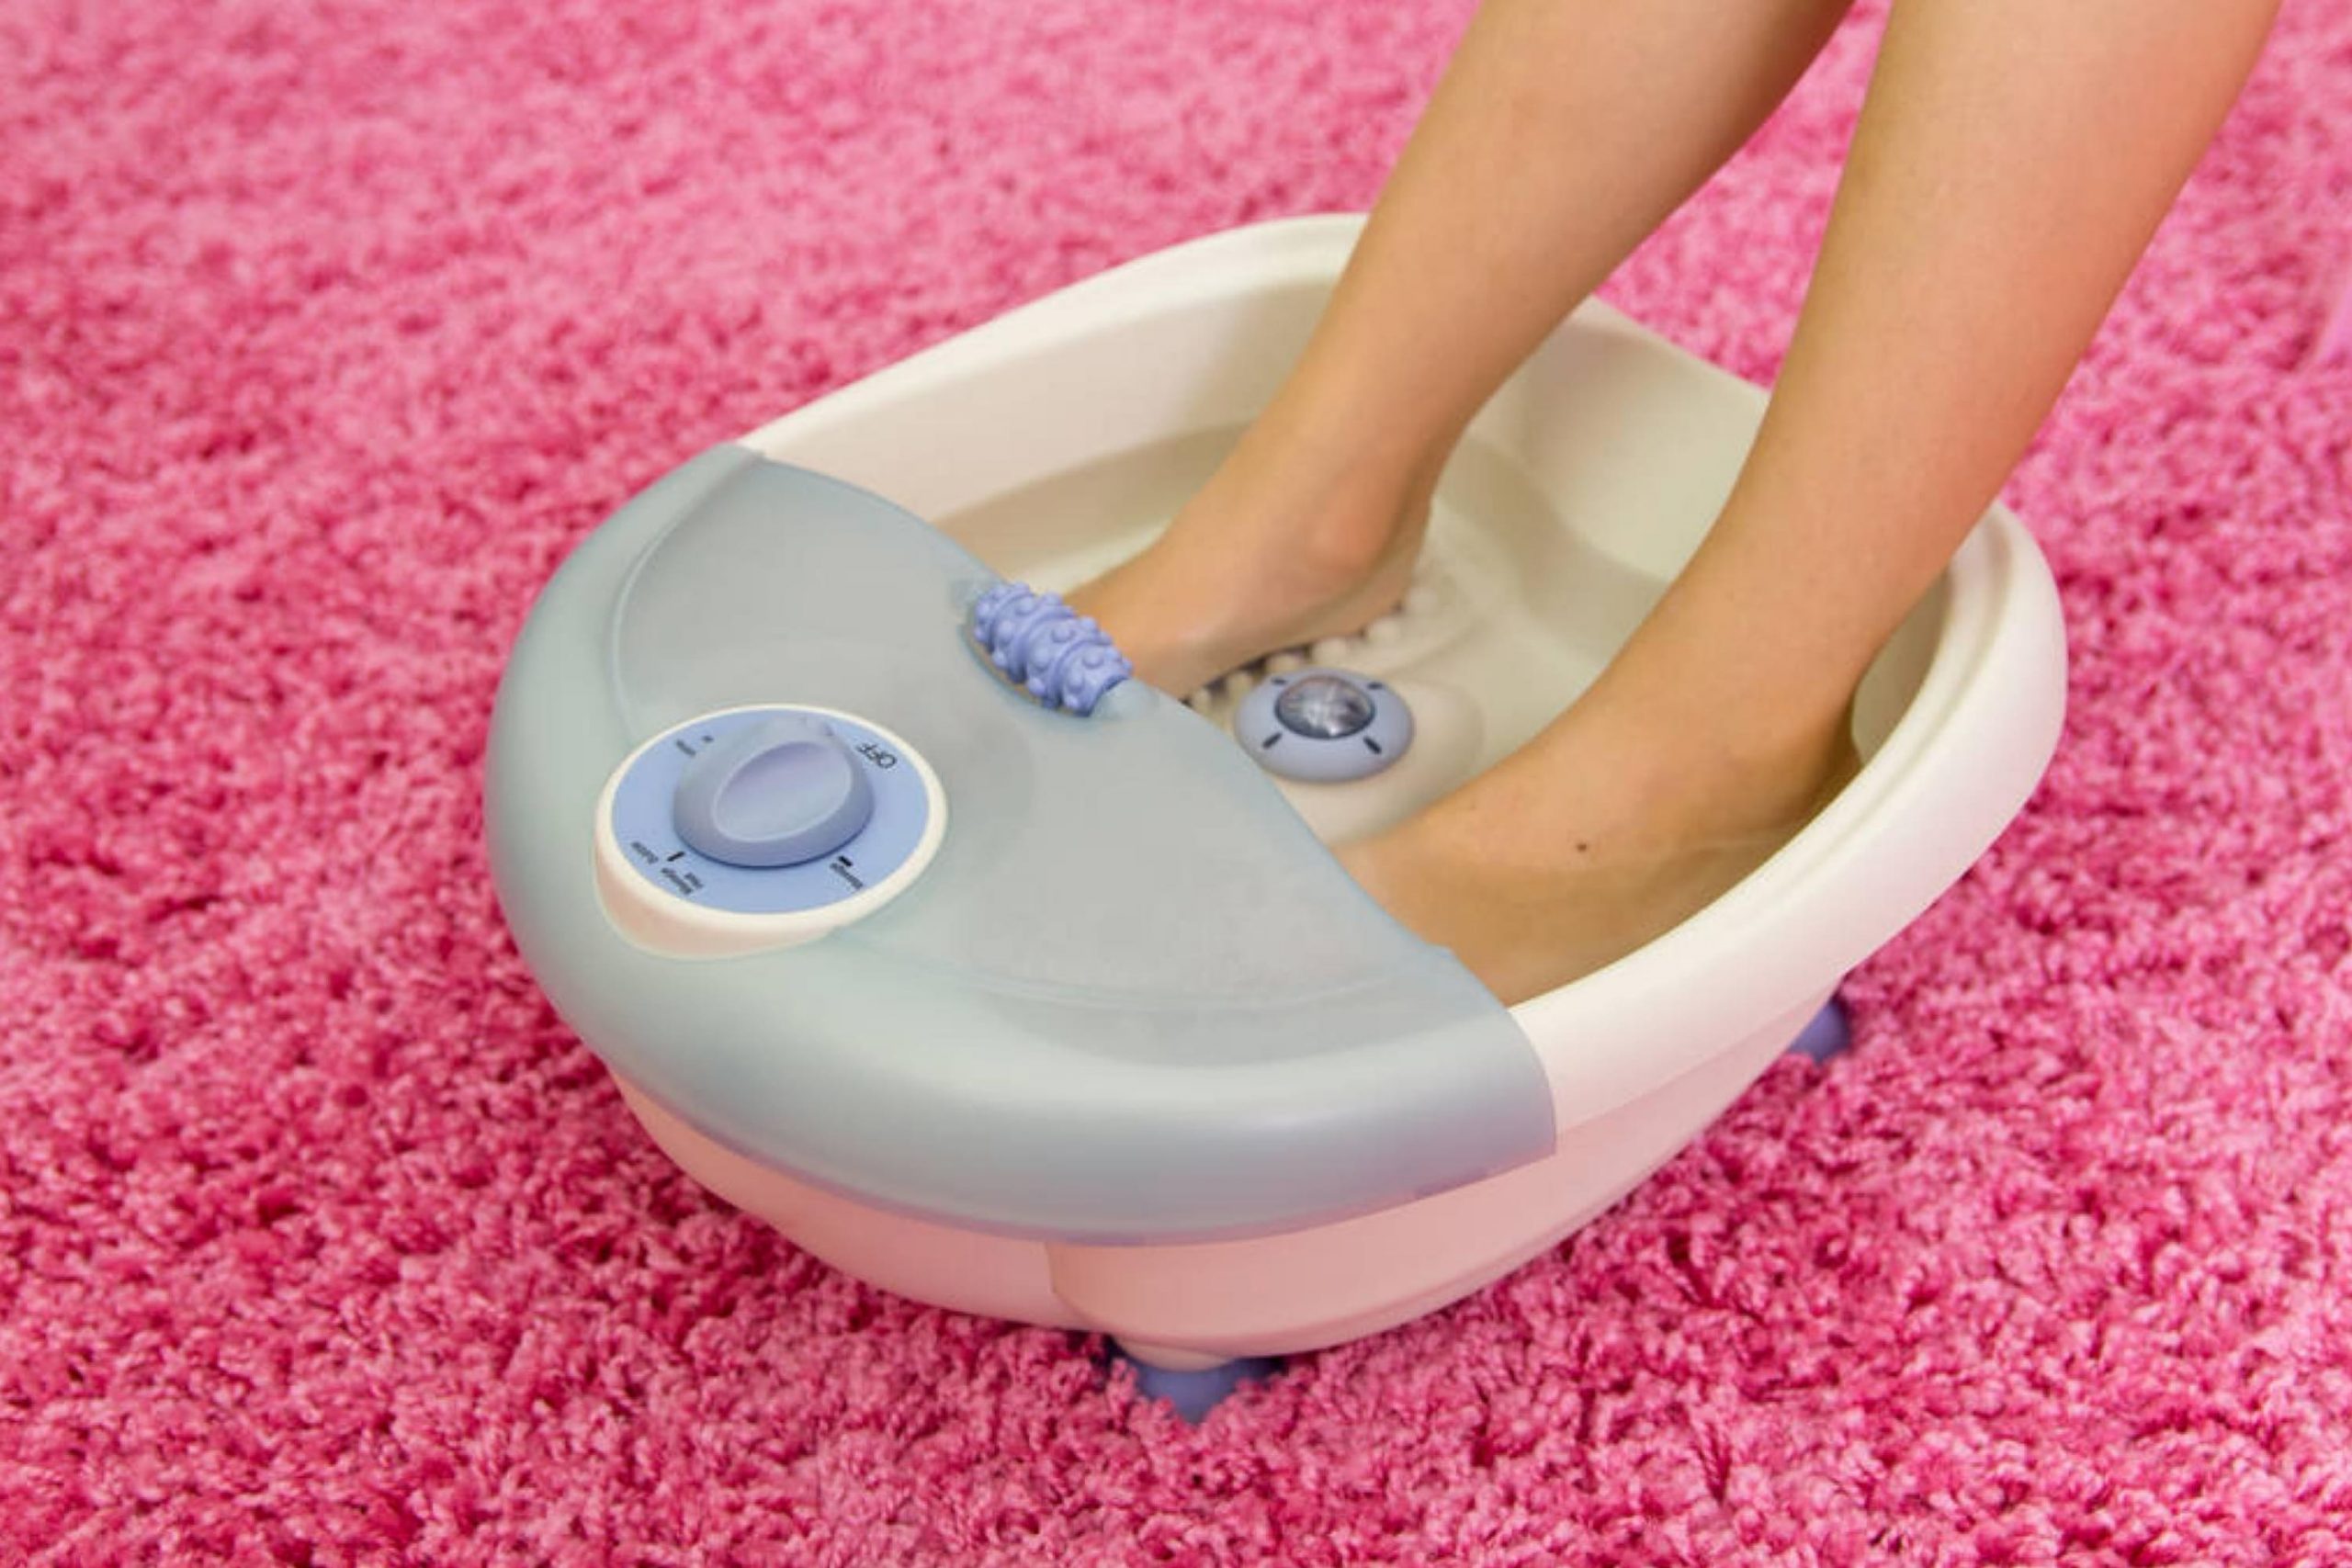 How to Clean Your Feet at Home With a Home Foot Spa. Tips And Life Hacks